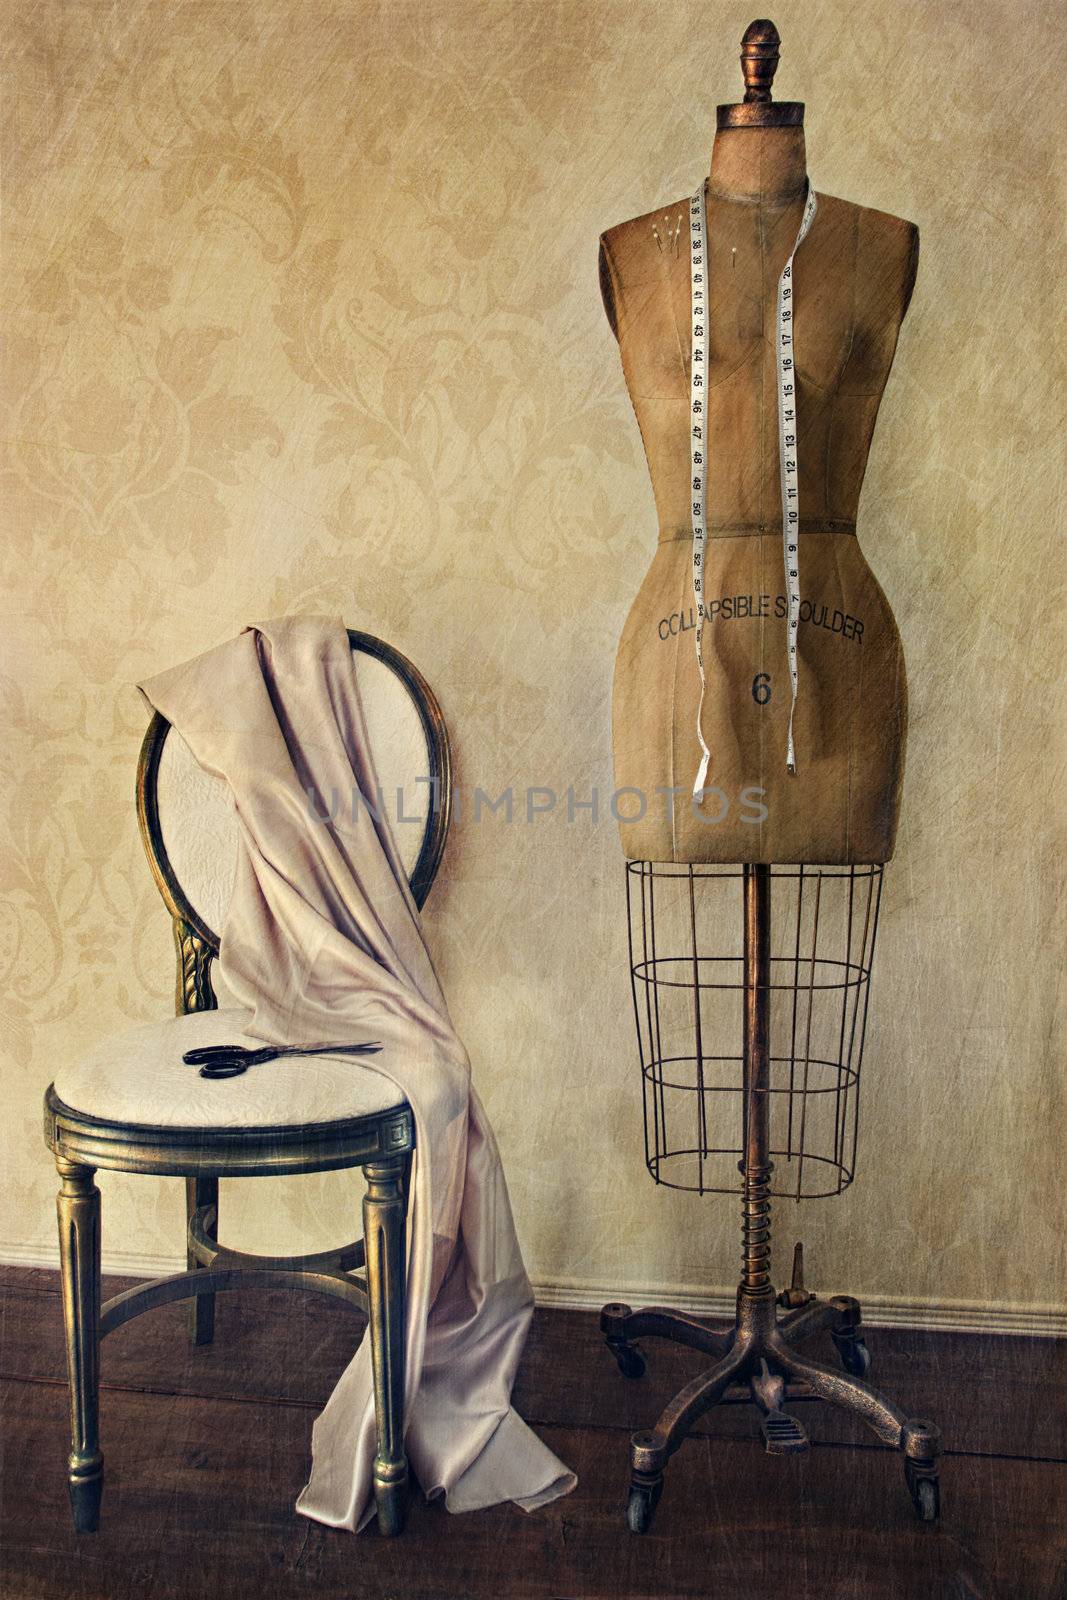 Antique dress form and chair with vintage feeling by Sandralise